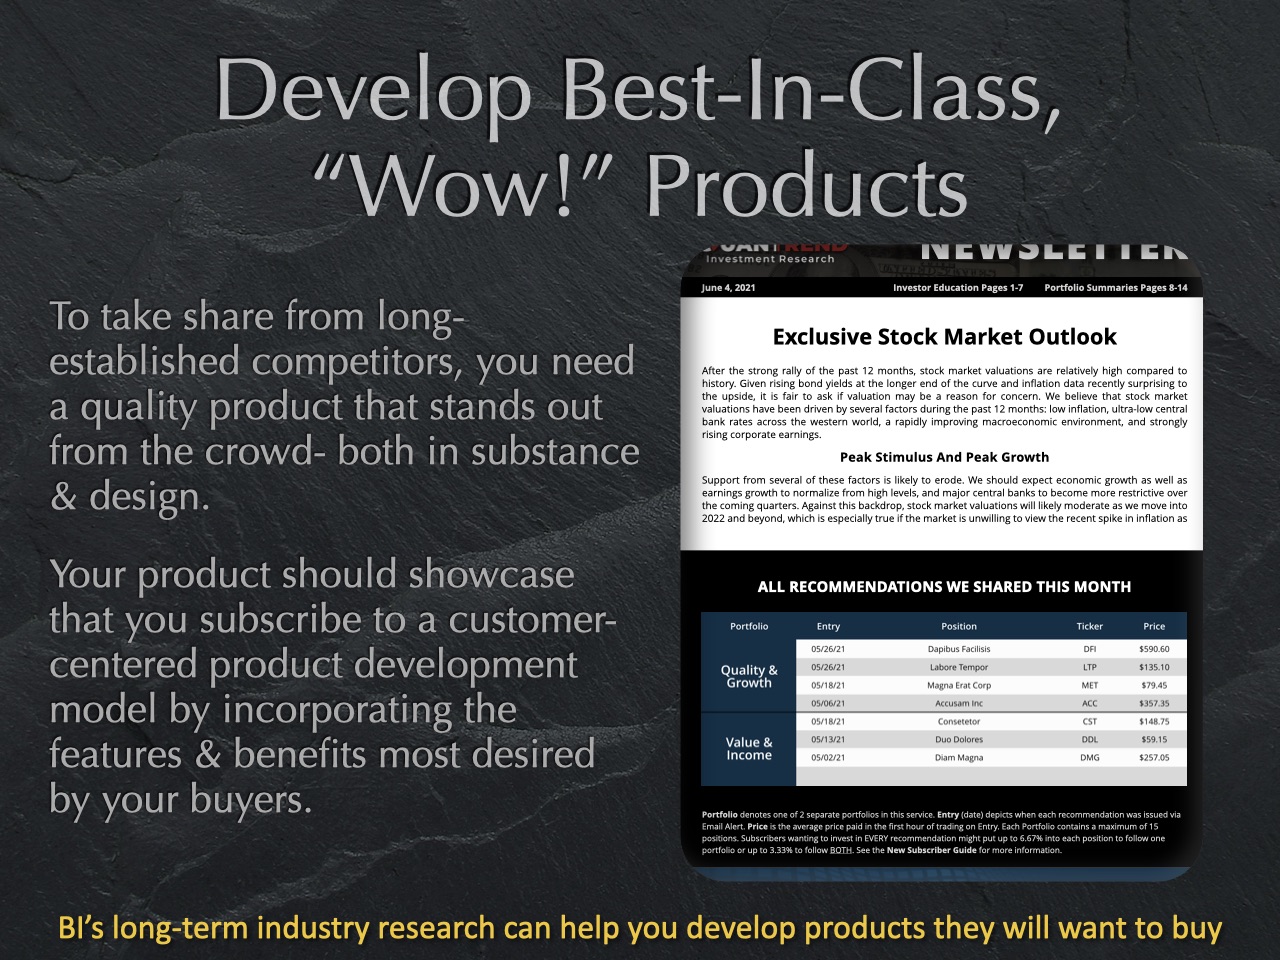 Develop a best-in-class investor newsletter or trader alert product or service